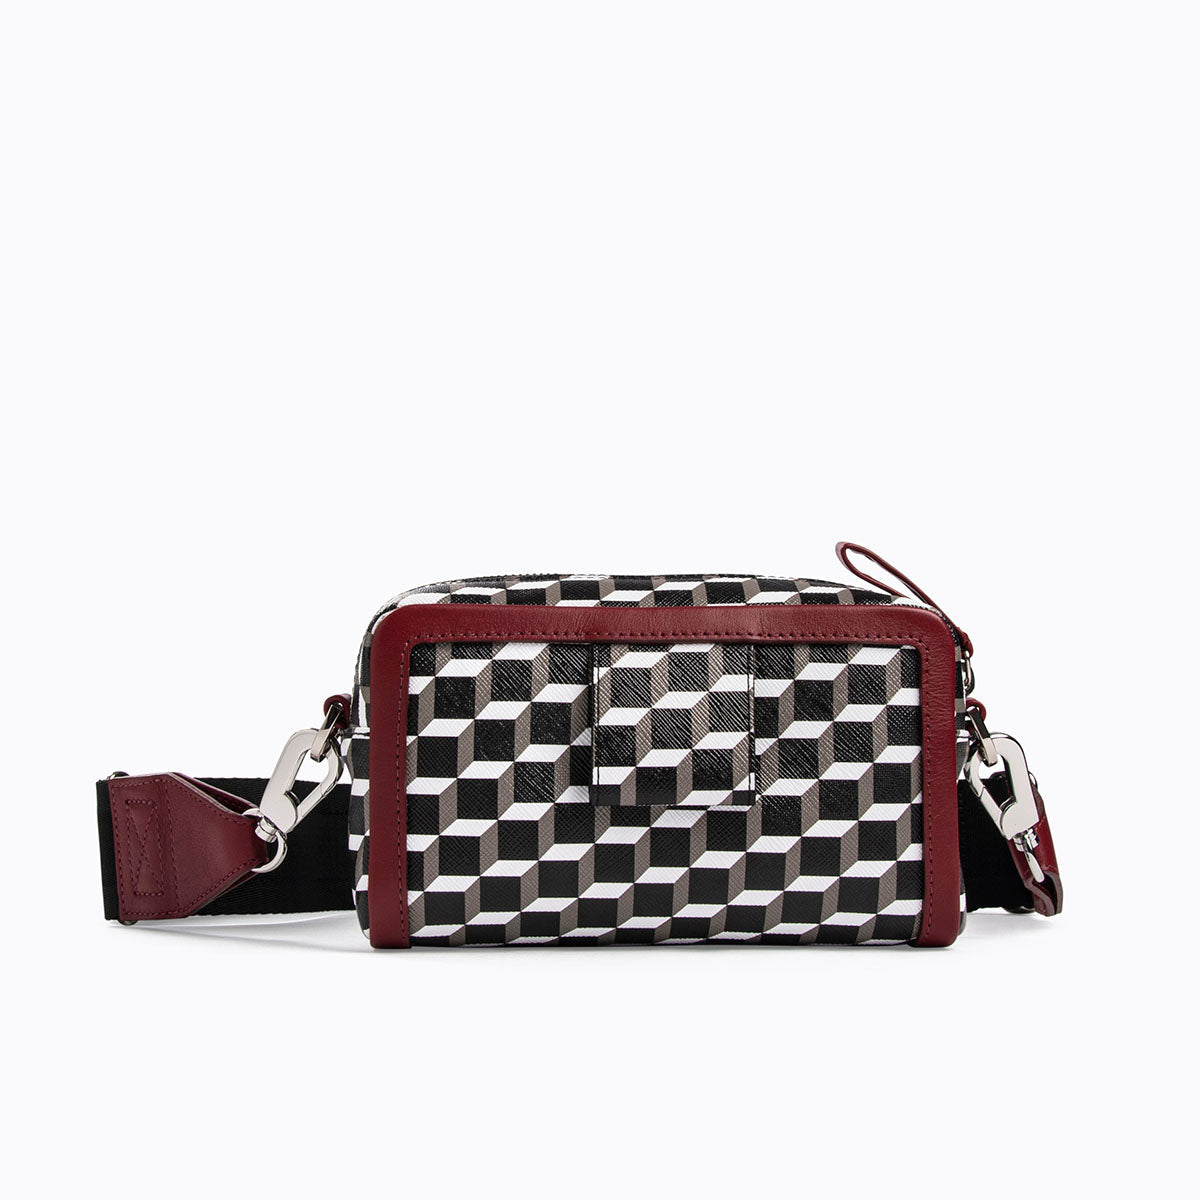 CUBE BOX unisex bag in Cube canvas & burgundy leather